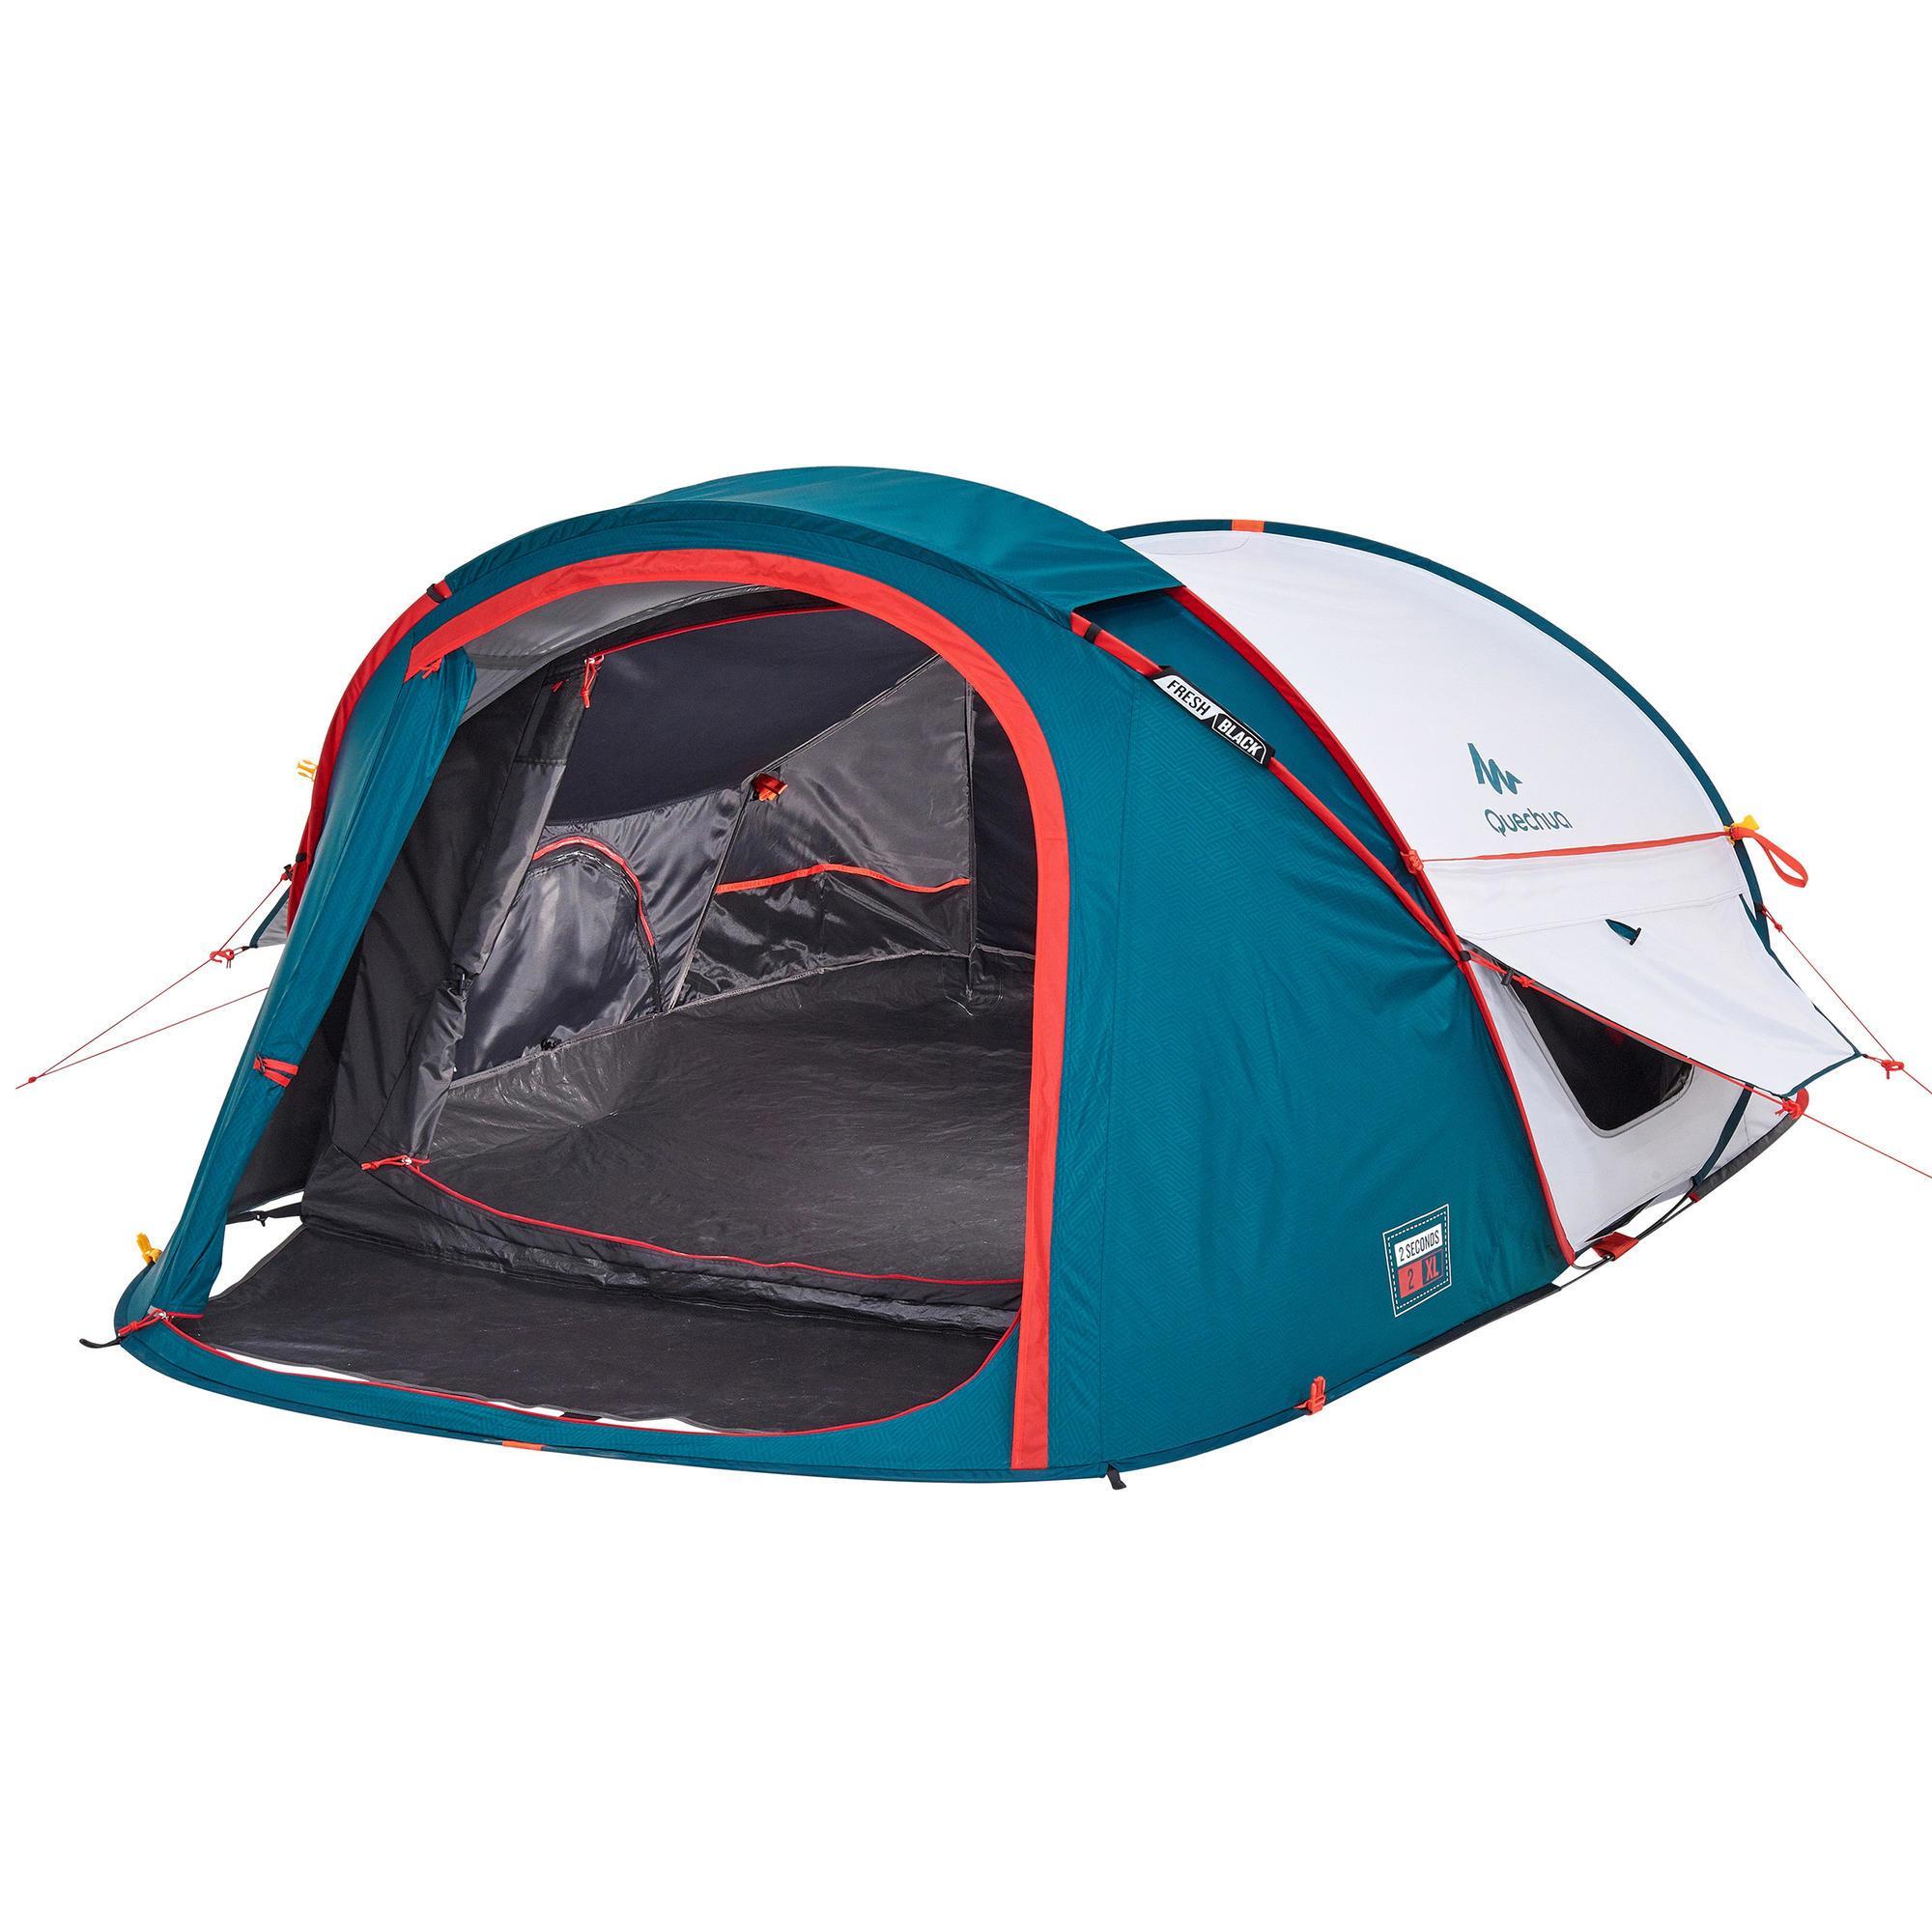 Cort camping 2 SECONDS XL FRESH&BLACK 2 persoane Camping